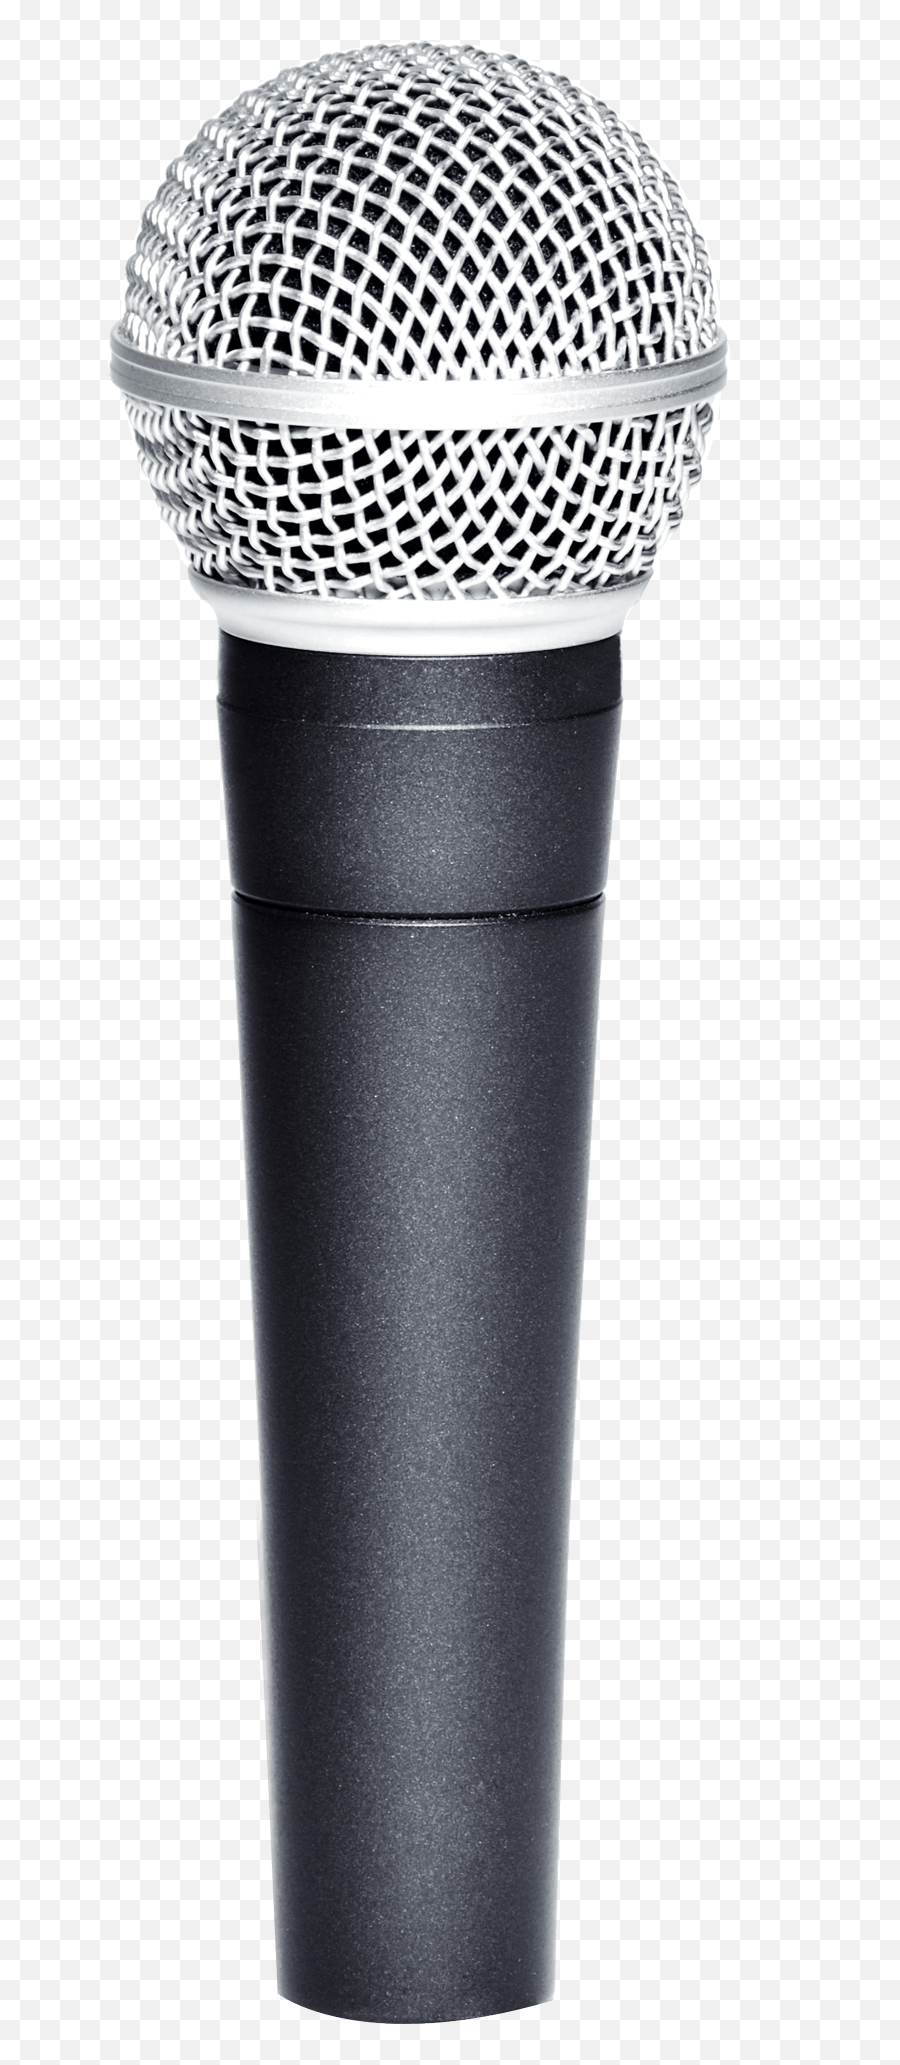 Microphone Png Transparent Image - Shure Sm58 Microphone Emoji,Microphone Png